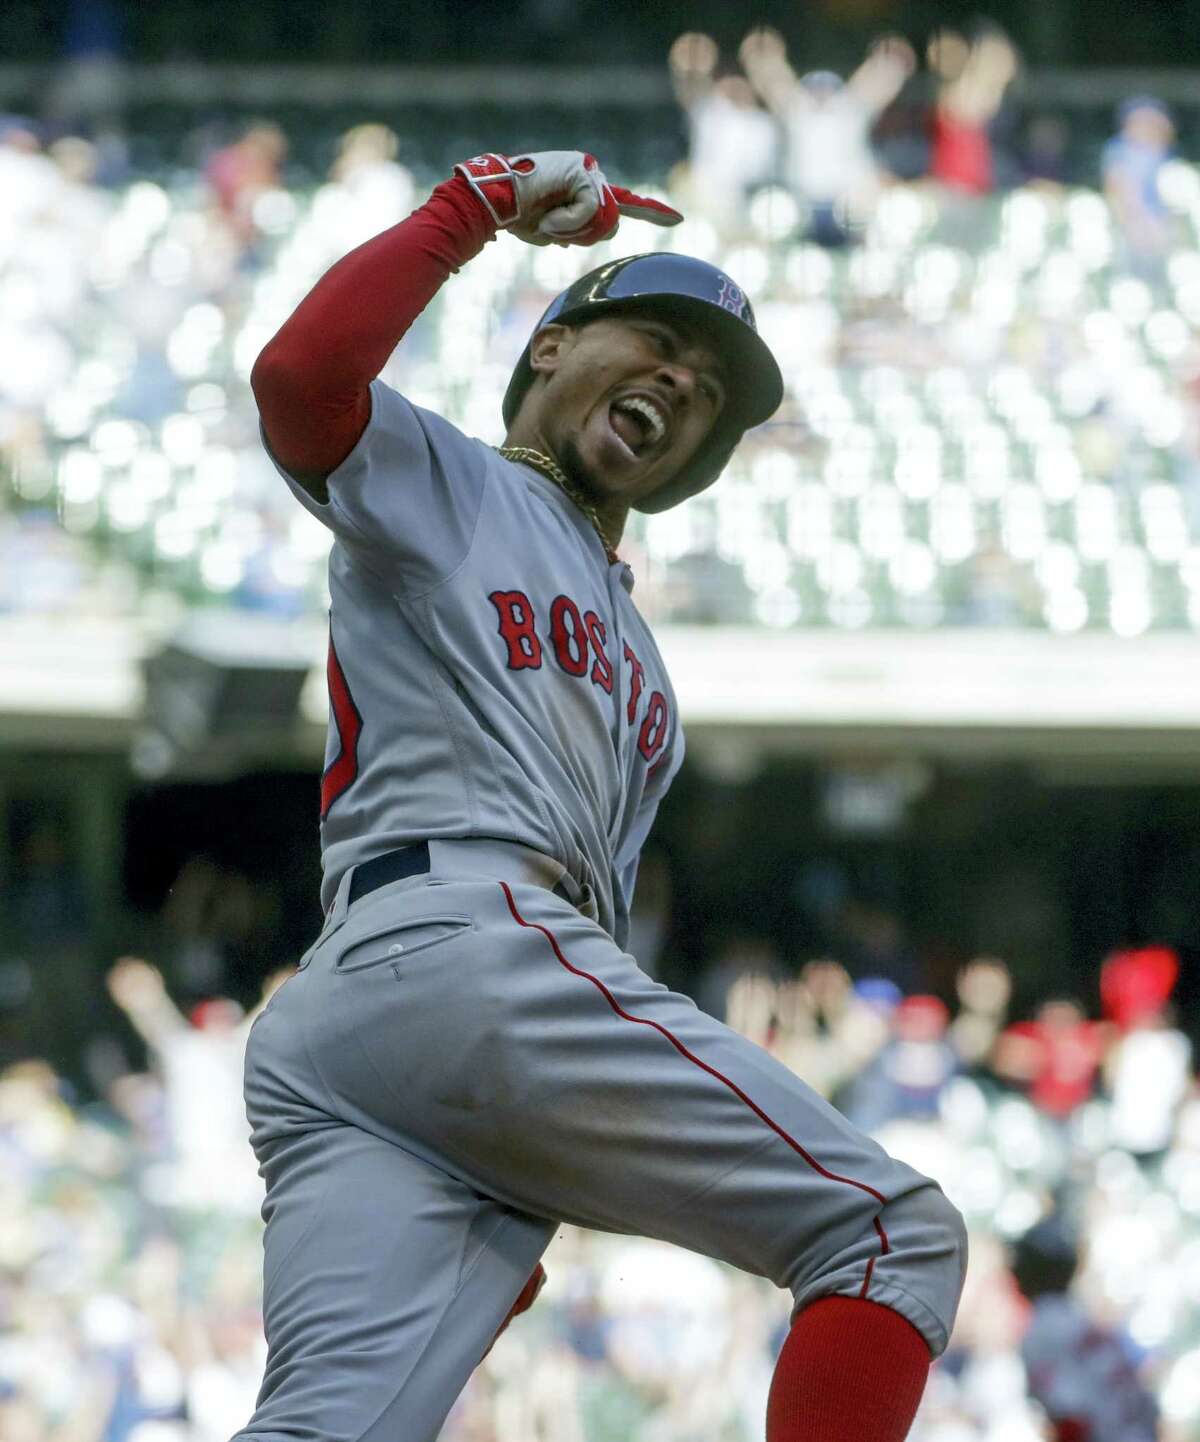 Mookie Betts reacts as he rounds first after hitting a home run in the ninth inning.